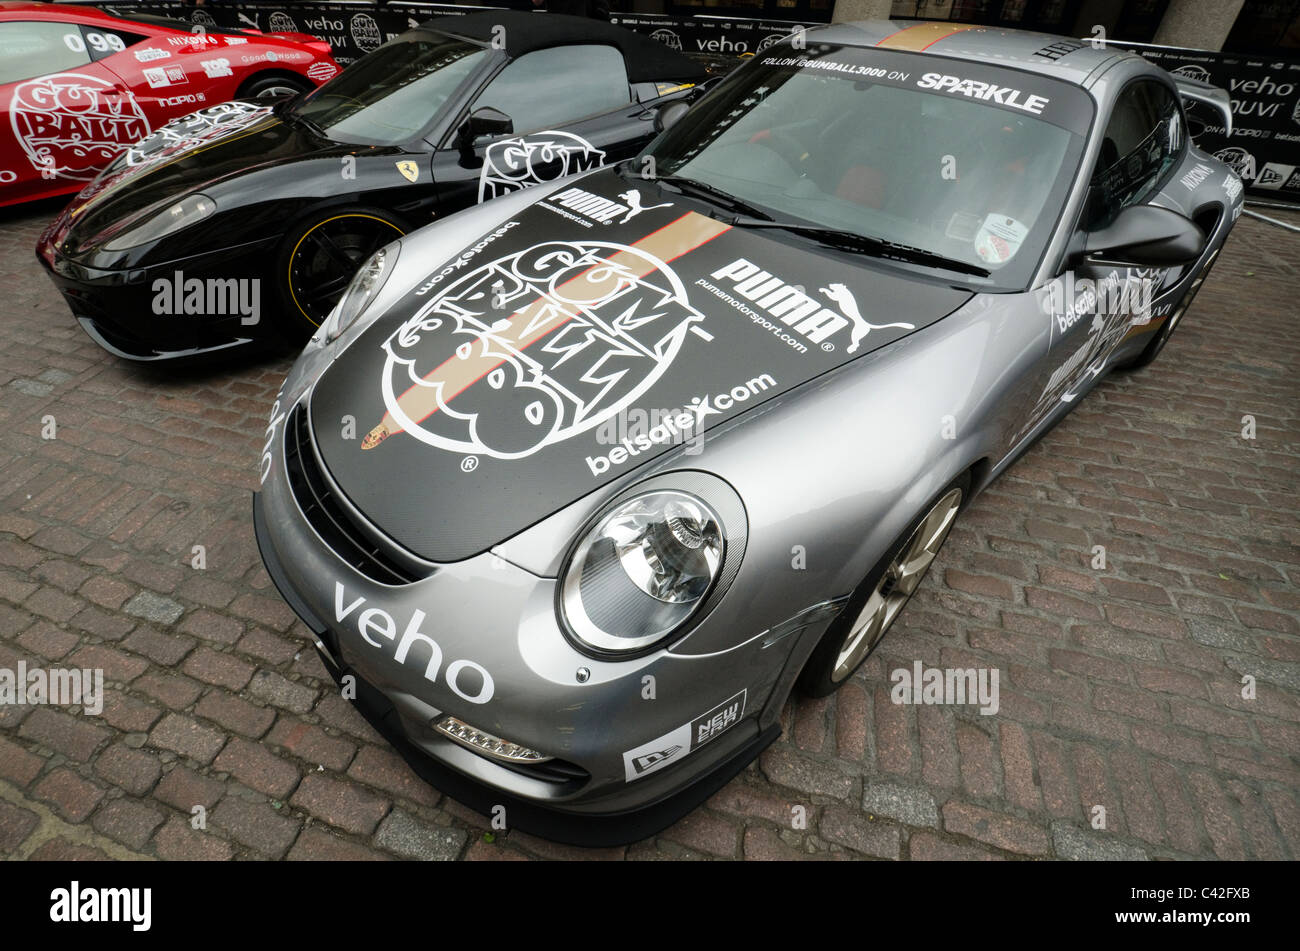 Porsche 911 Parked At Covent Garden Piazza The Start Of The Gumball Rally 3000 Stock Photo Alamy